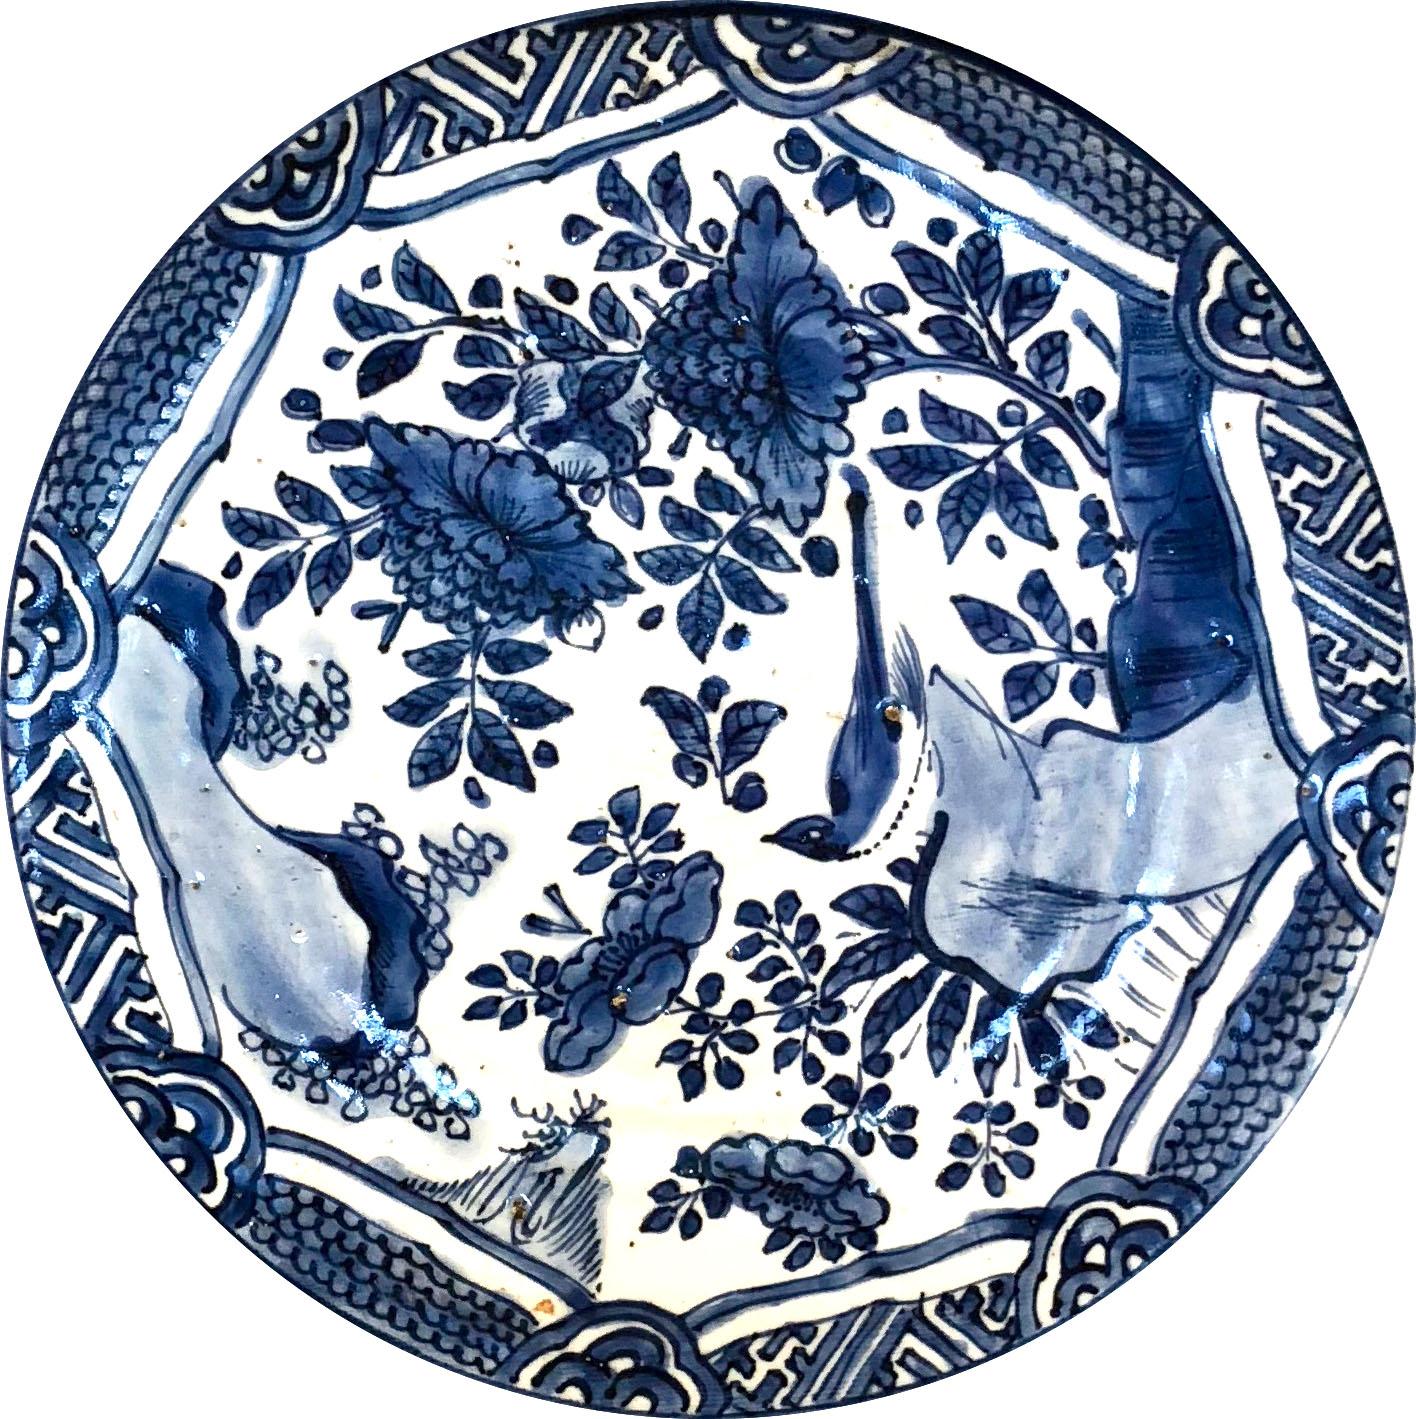 A Chinese porcelain dish, so-called kraakporselein, Ming Dynasty, Wanli Period (1573-1619), Jingdezhen kilns. Underglaze blue decoration depicting a lobed medallion with a landscape and a bird landed on a rock. The medallion is framed by a band of